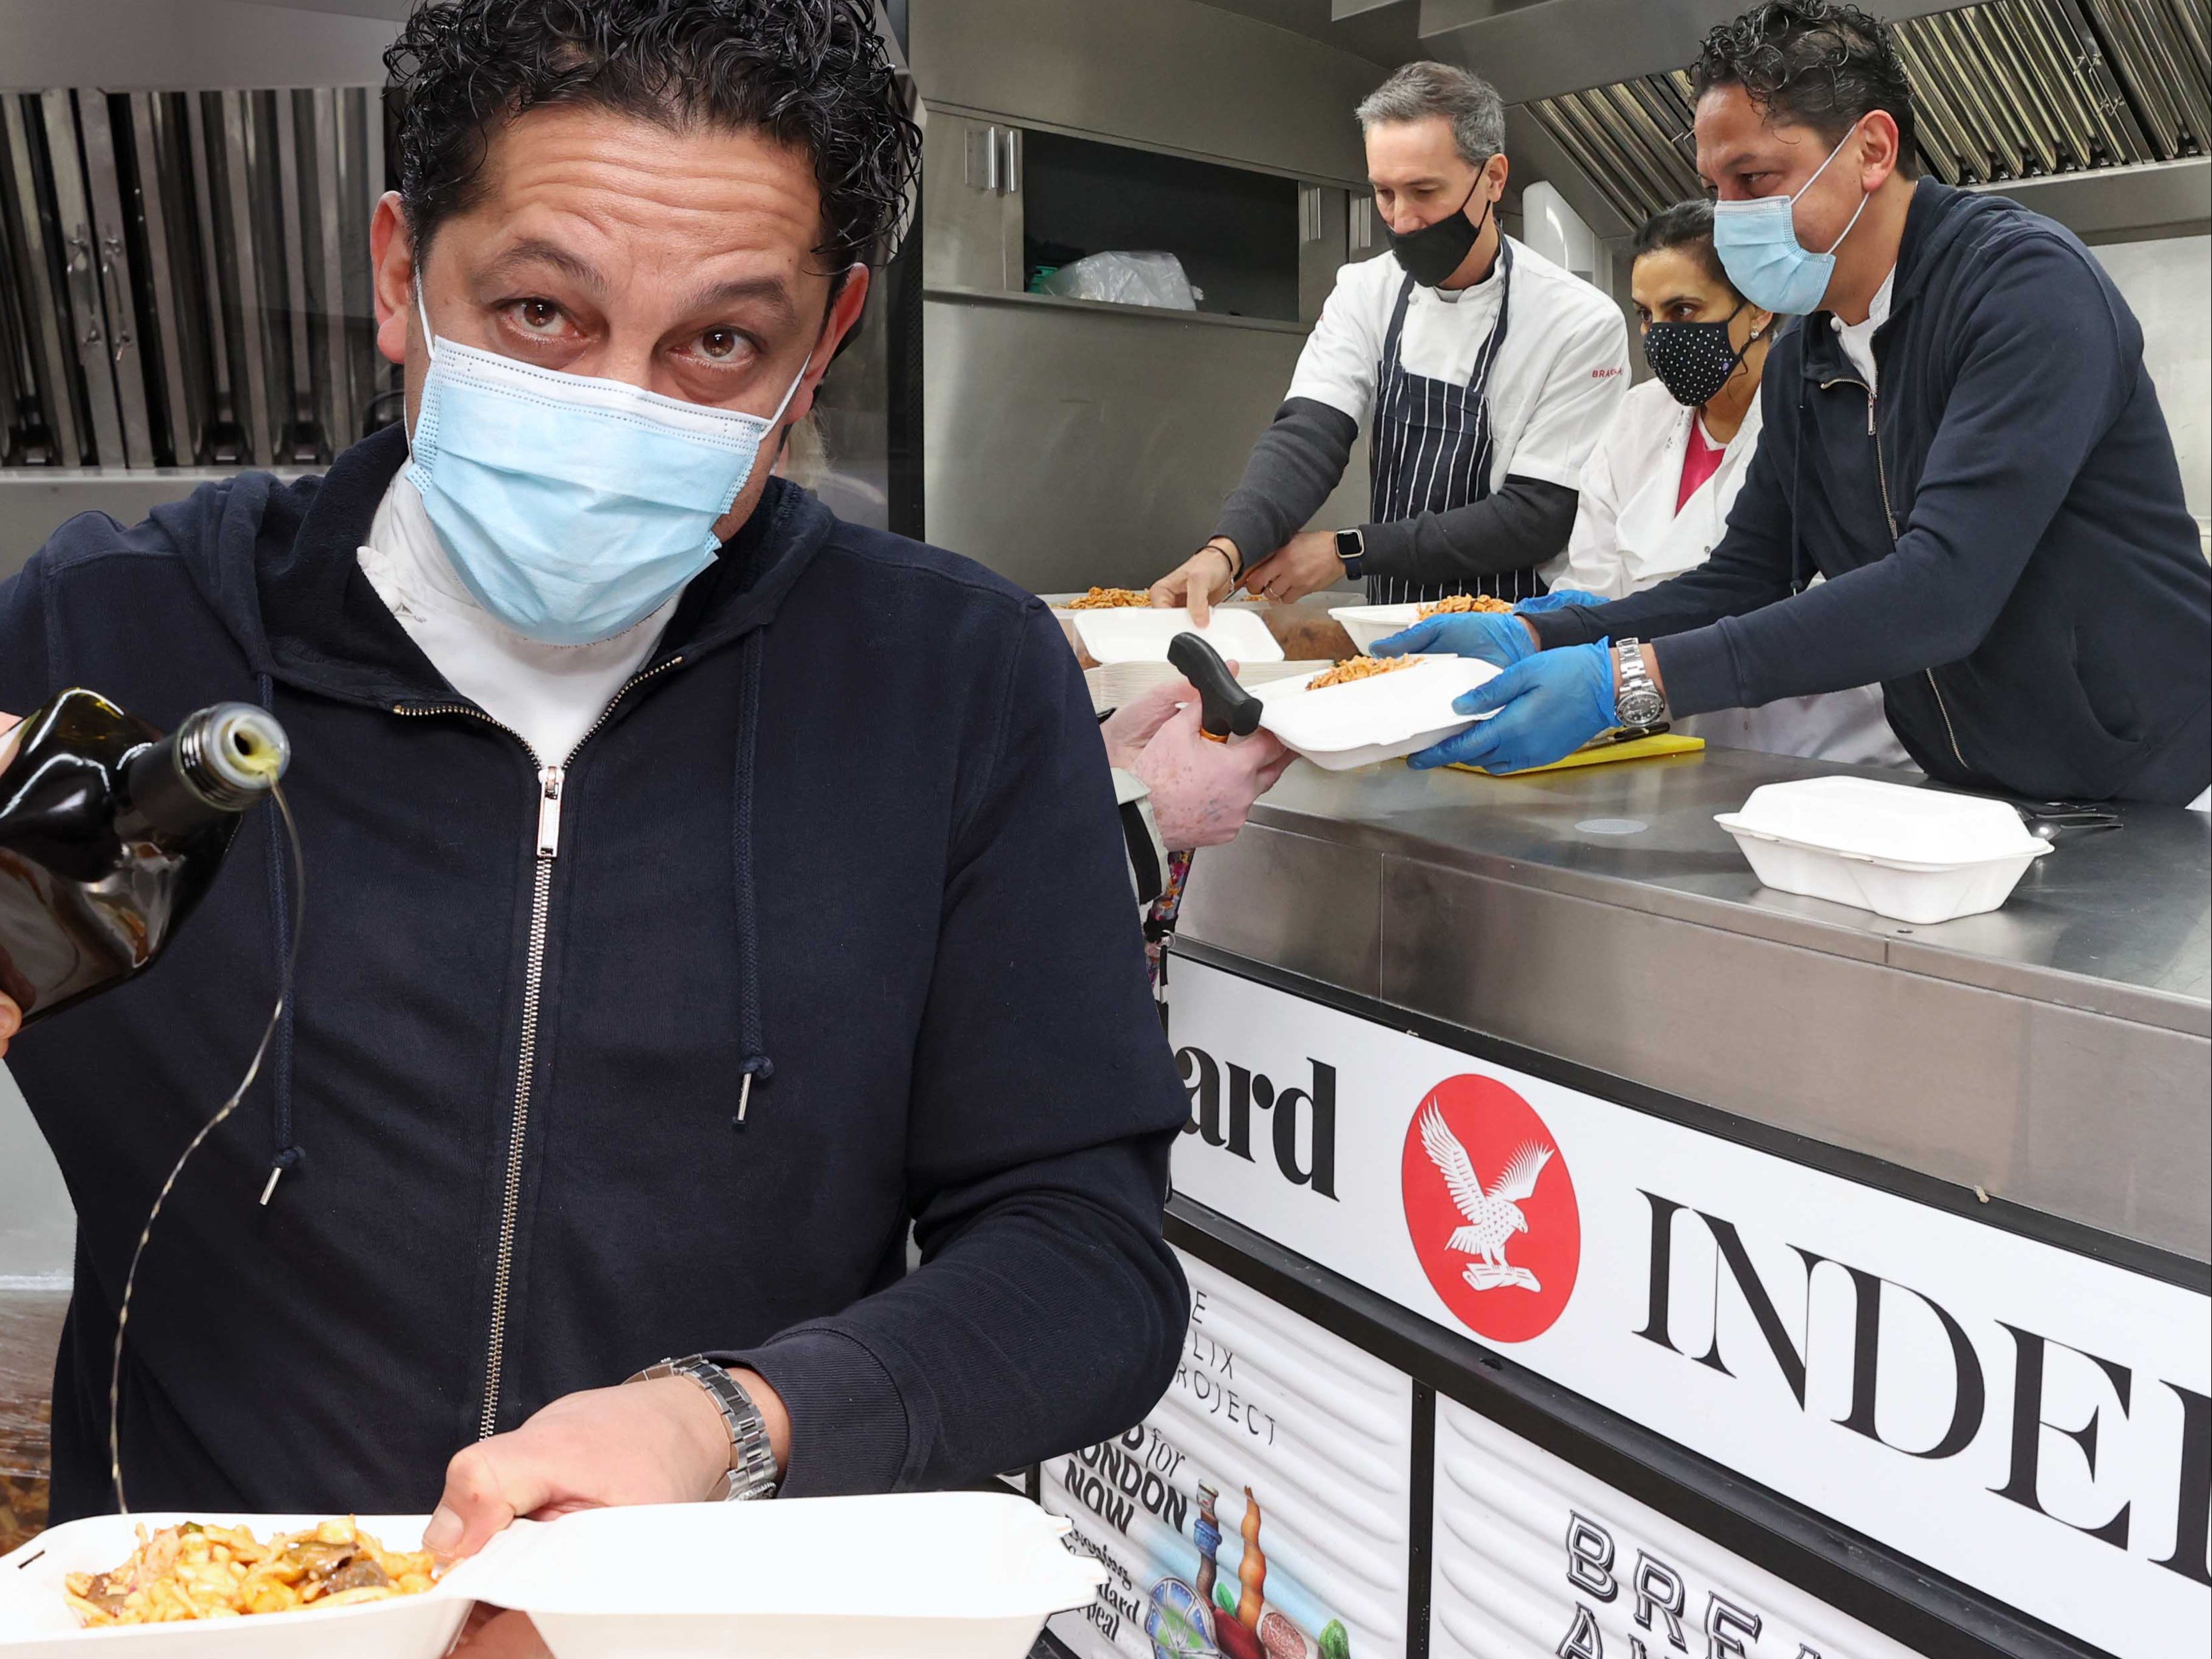 Chef Francesco Mazzei serves food from our campaign’s truck in Edmonton.